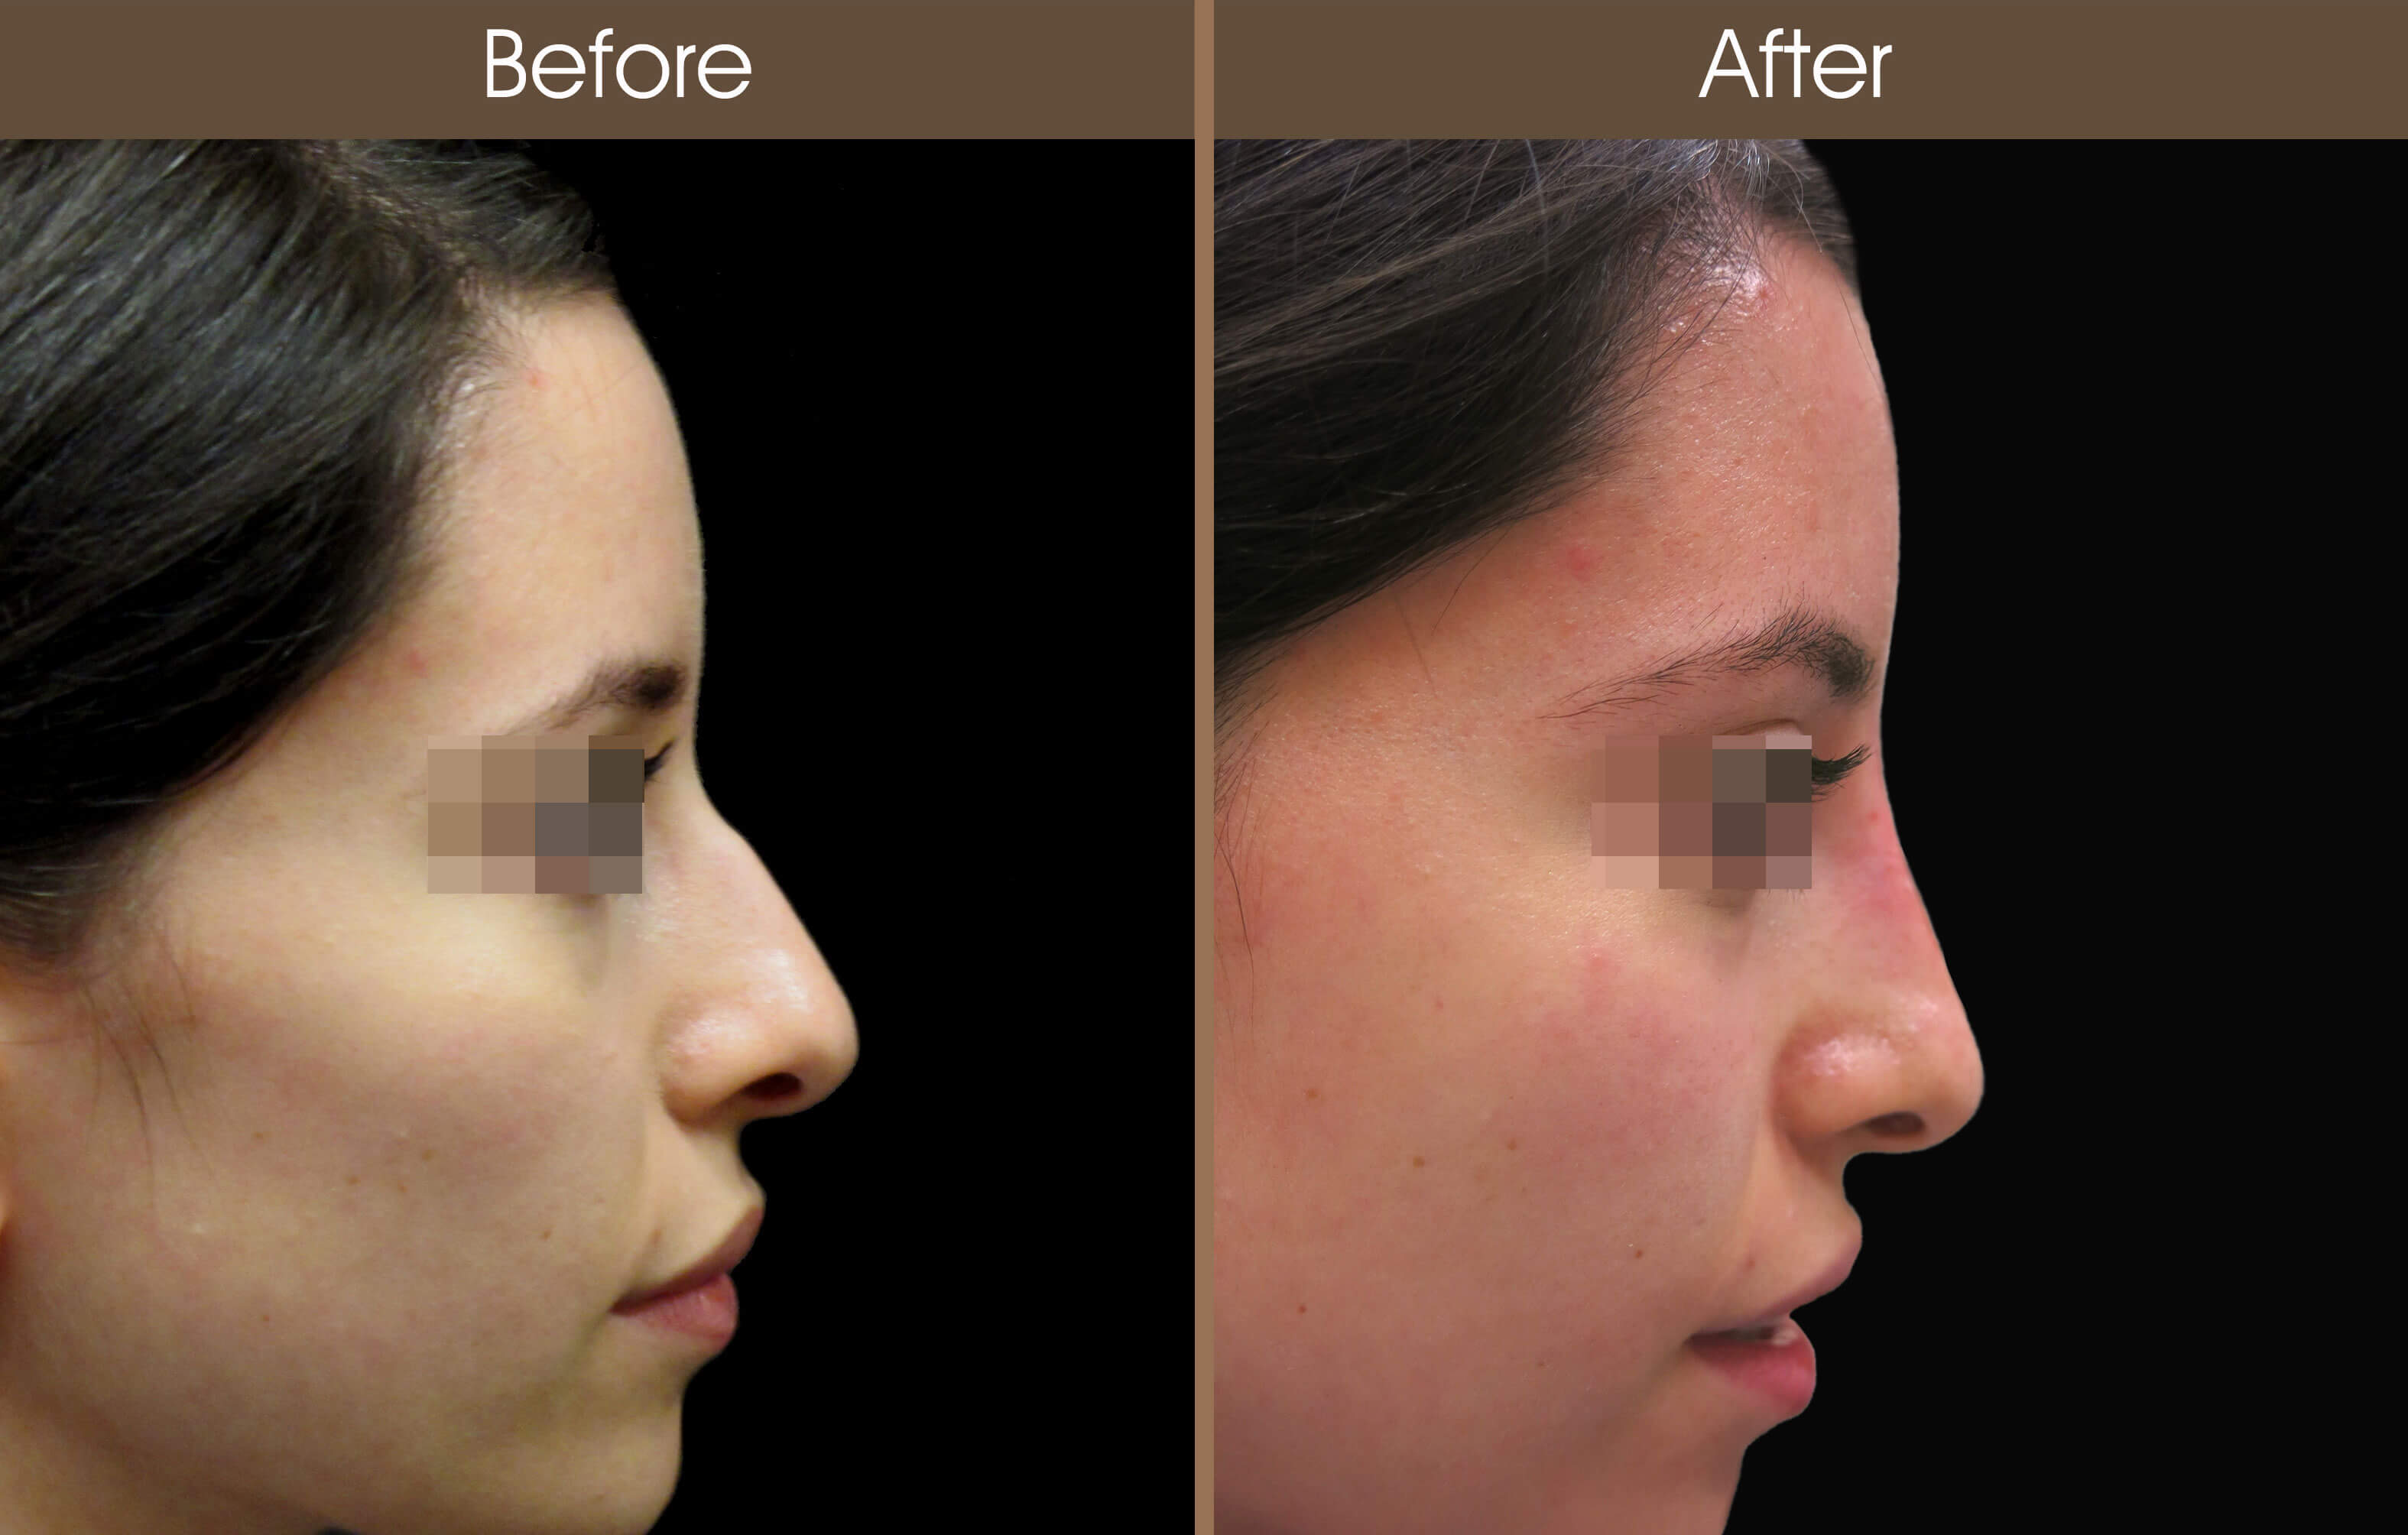 Non-Surgical Rhinoplasty Before And After